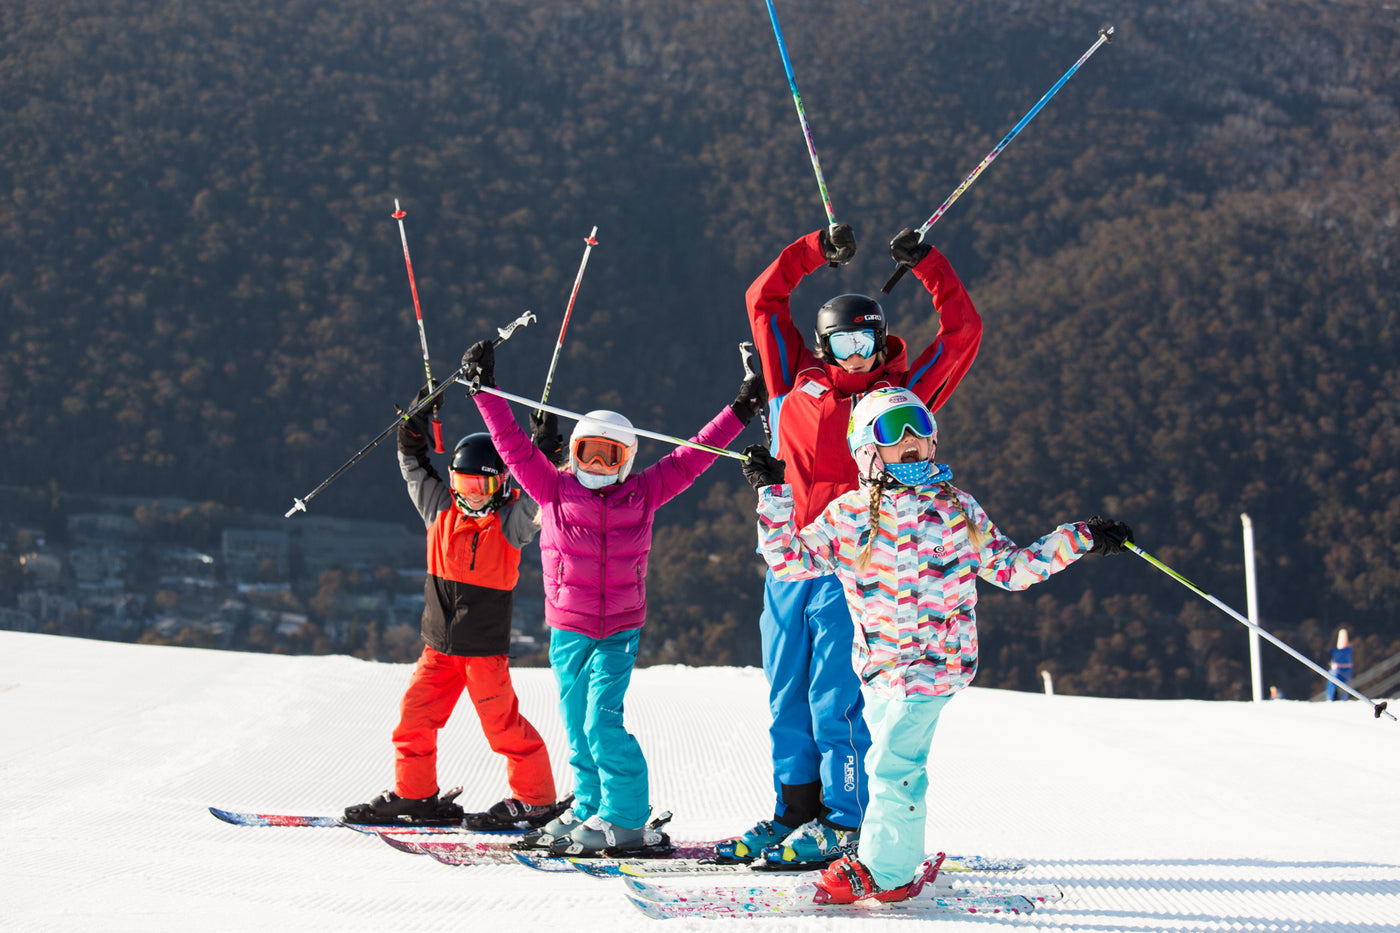 Top 5 Best Kids Ski Accessories that will make your life easier in 2022